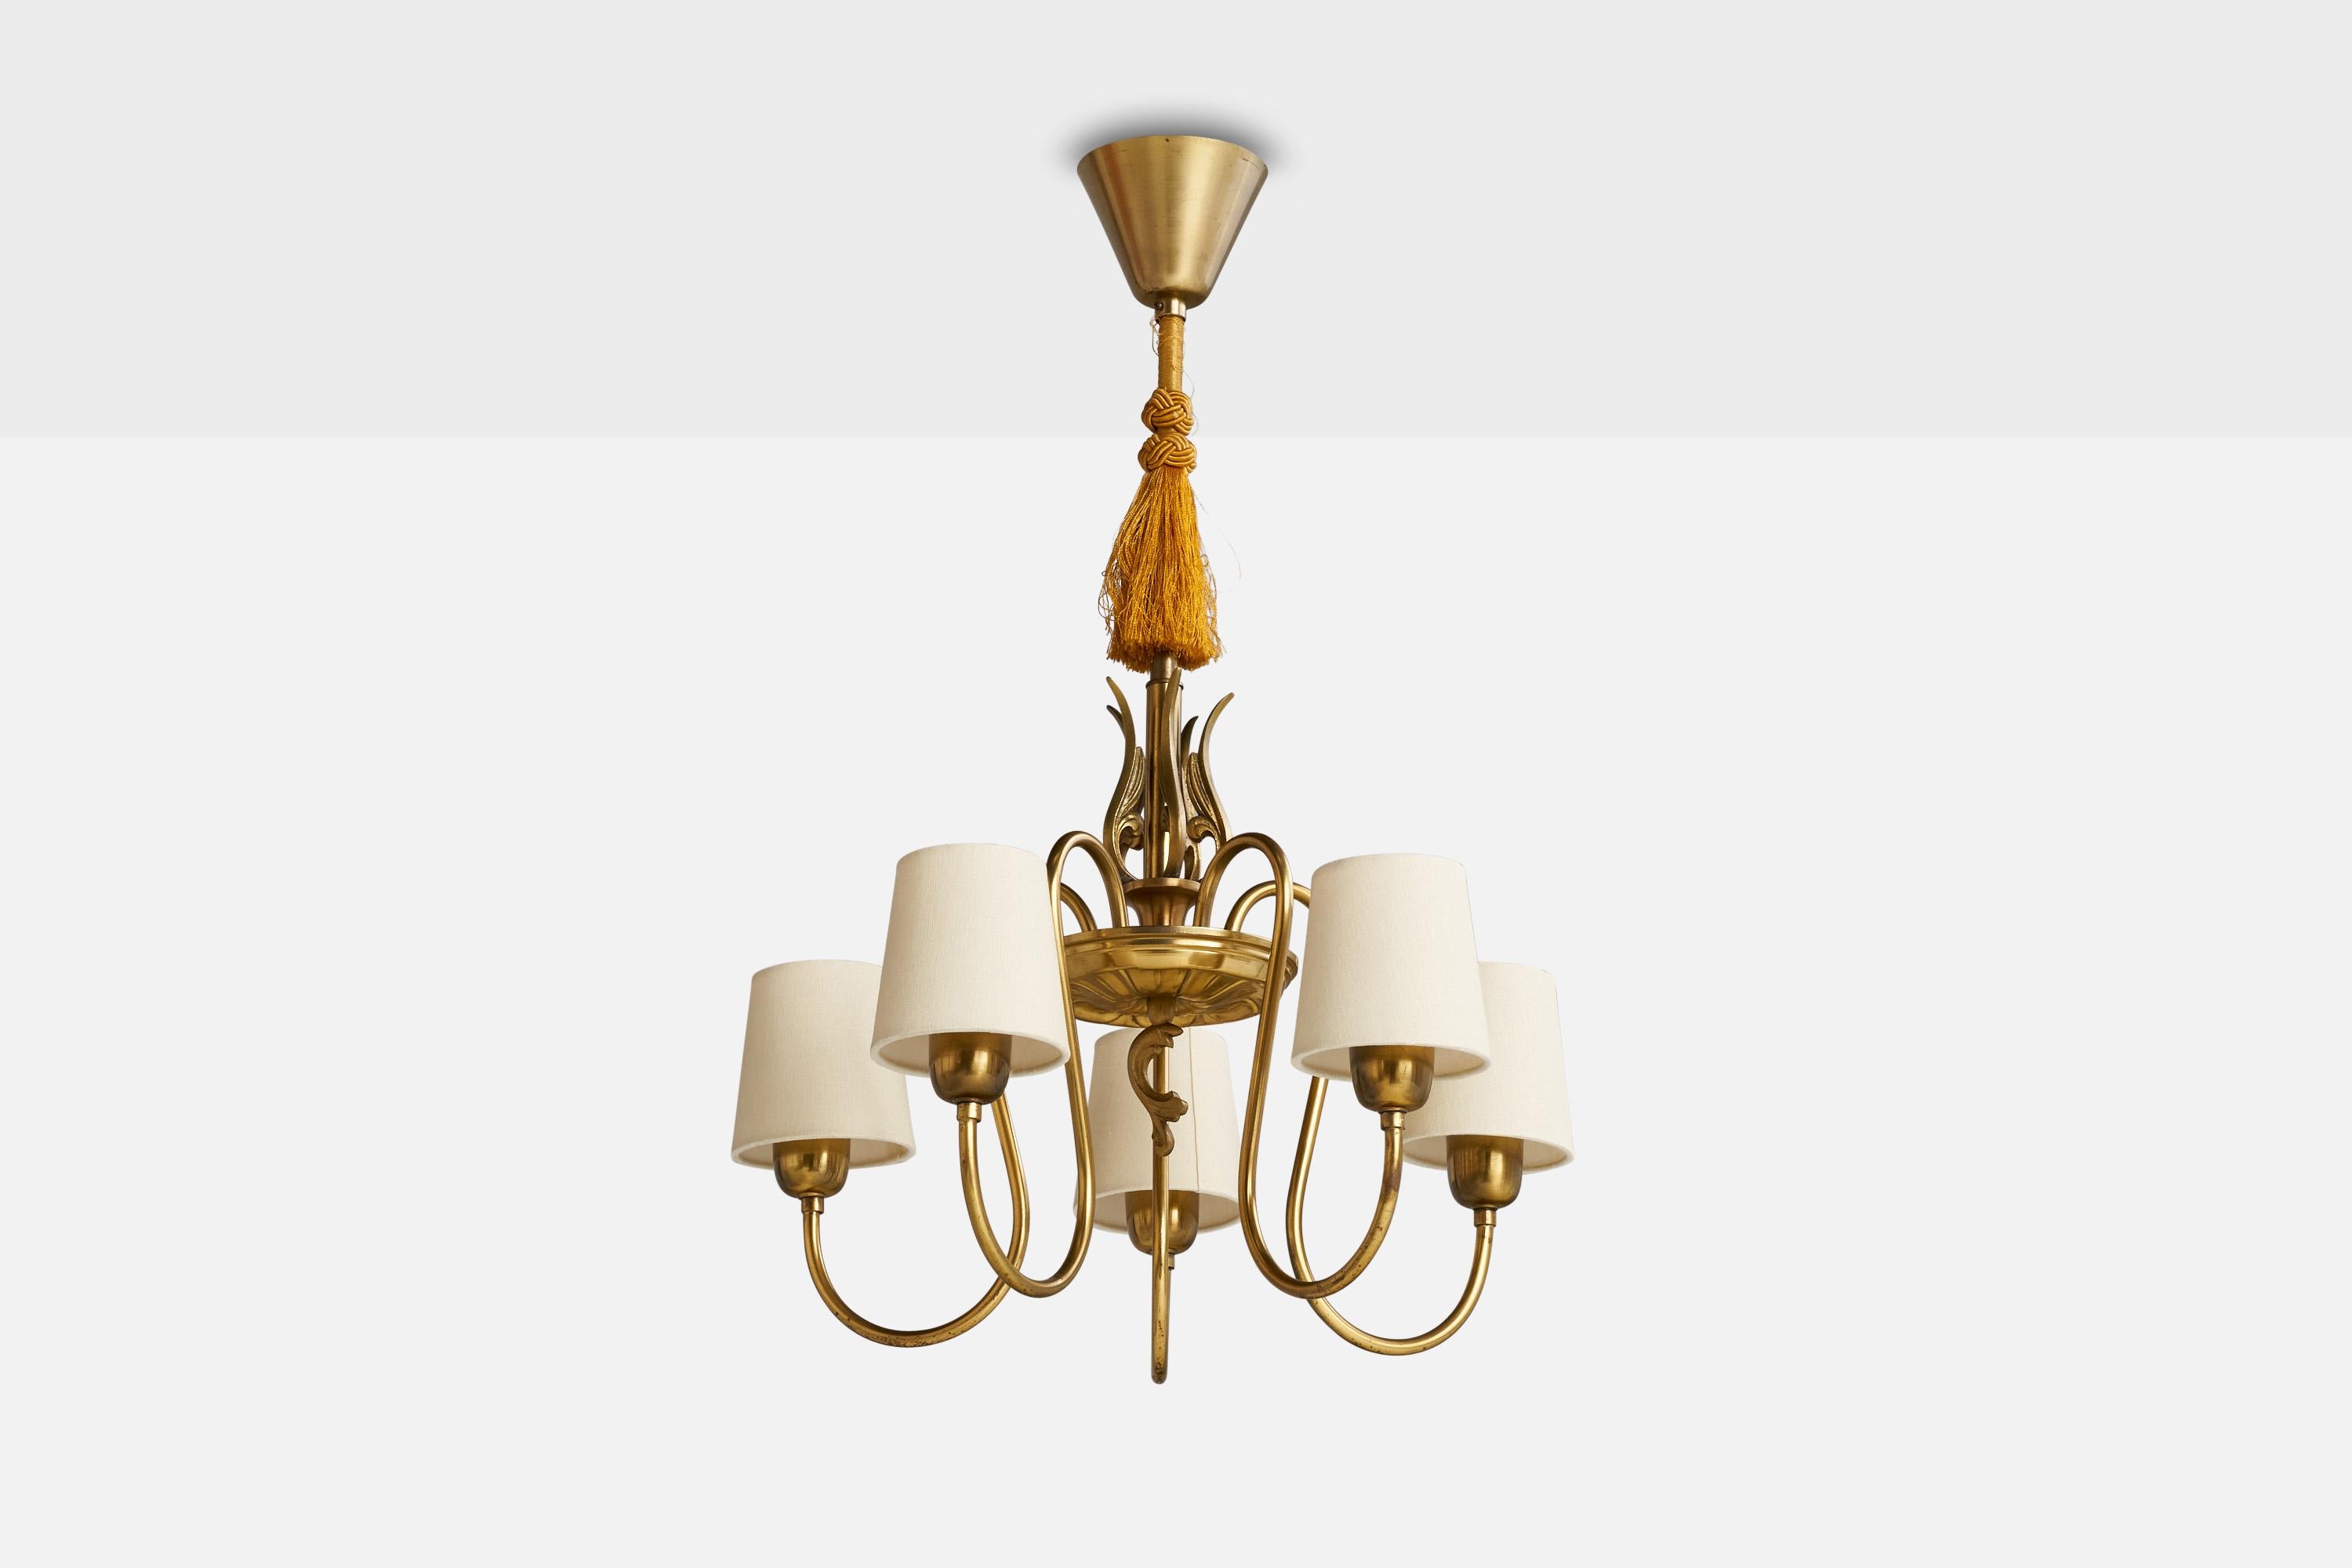 A brass, white fabric and beige string fabric chandelier designed and produced in Sweden, 1930s.

Dimensions of canopy (inches): 3.5” H x 4” Diameter
Socket takes standard E-26 bulbs. 5 sockets. There is no maximum wattage stated on the fixture. All